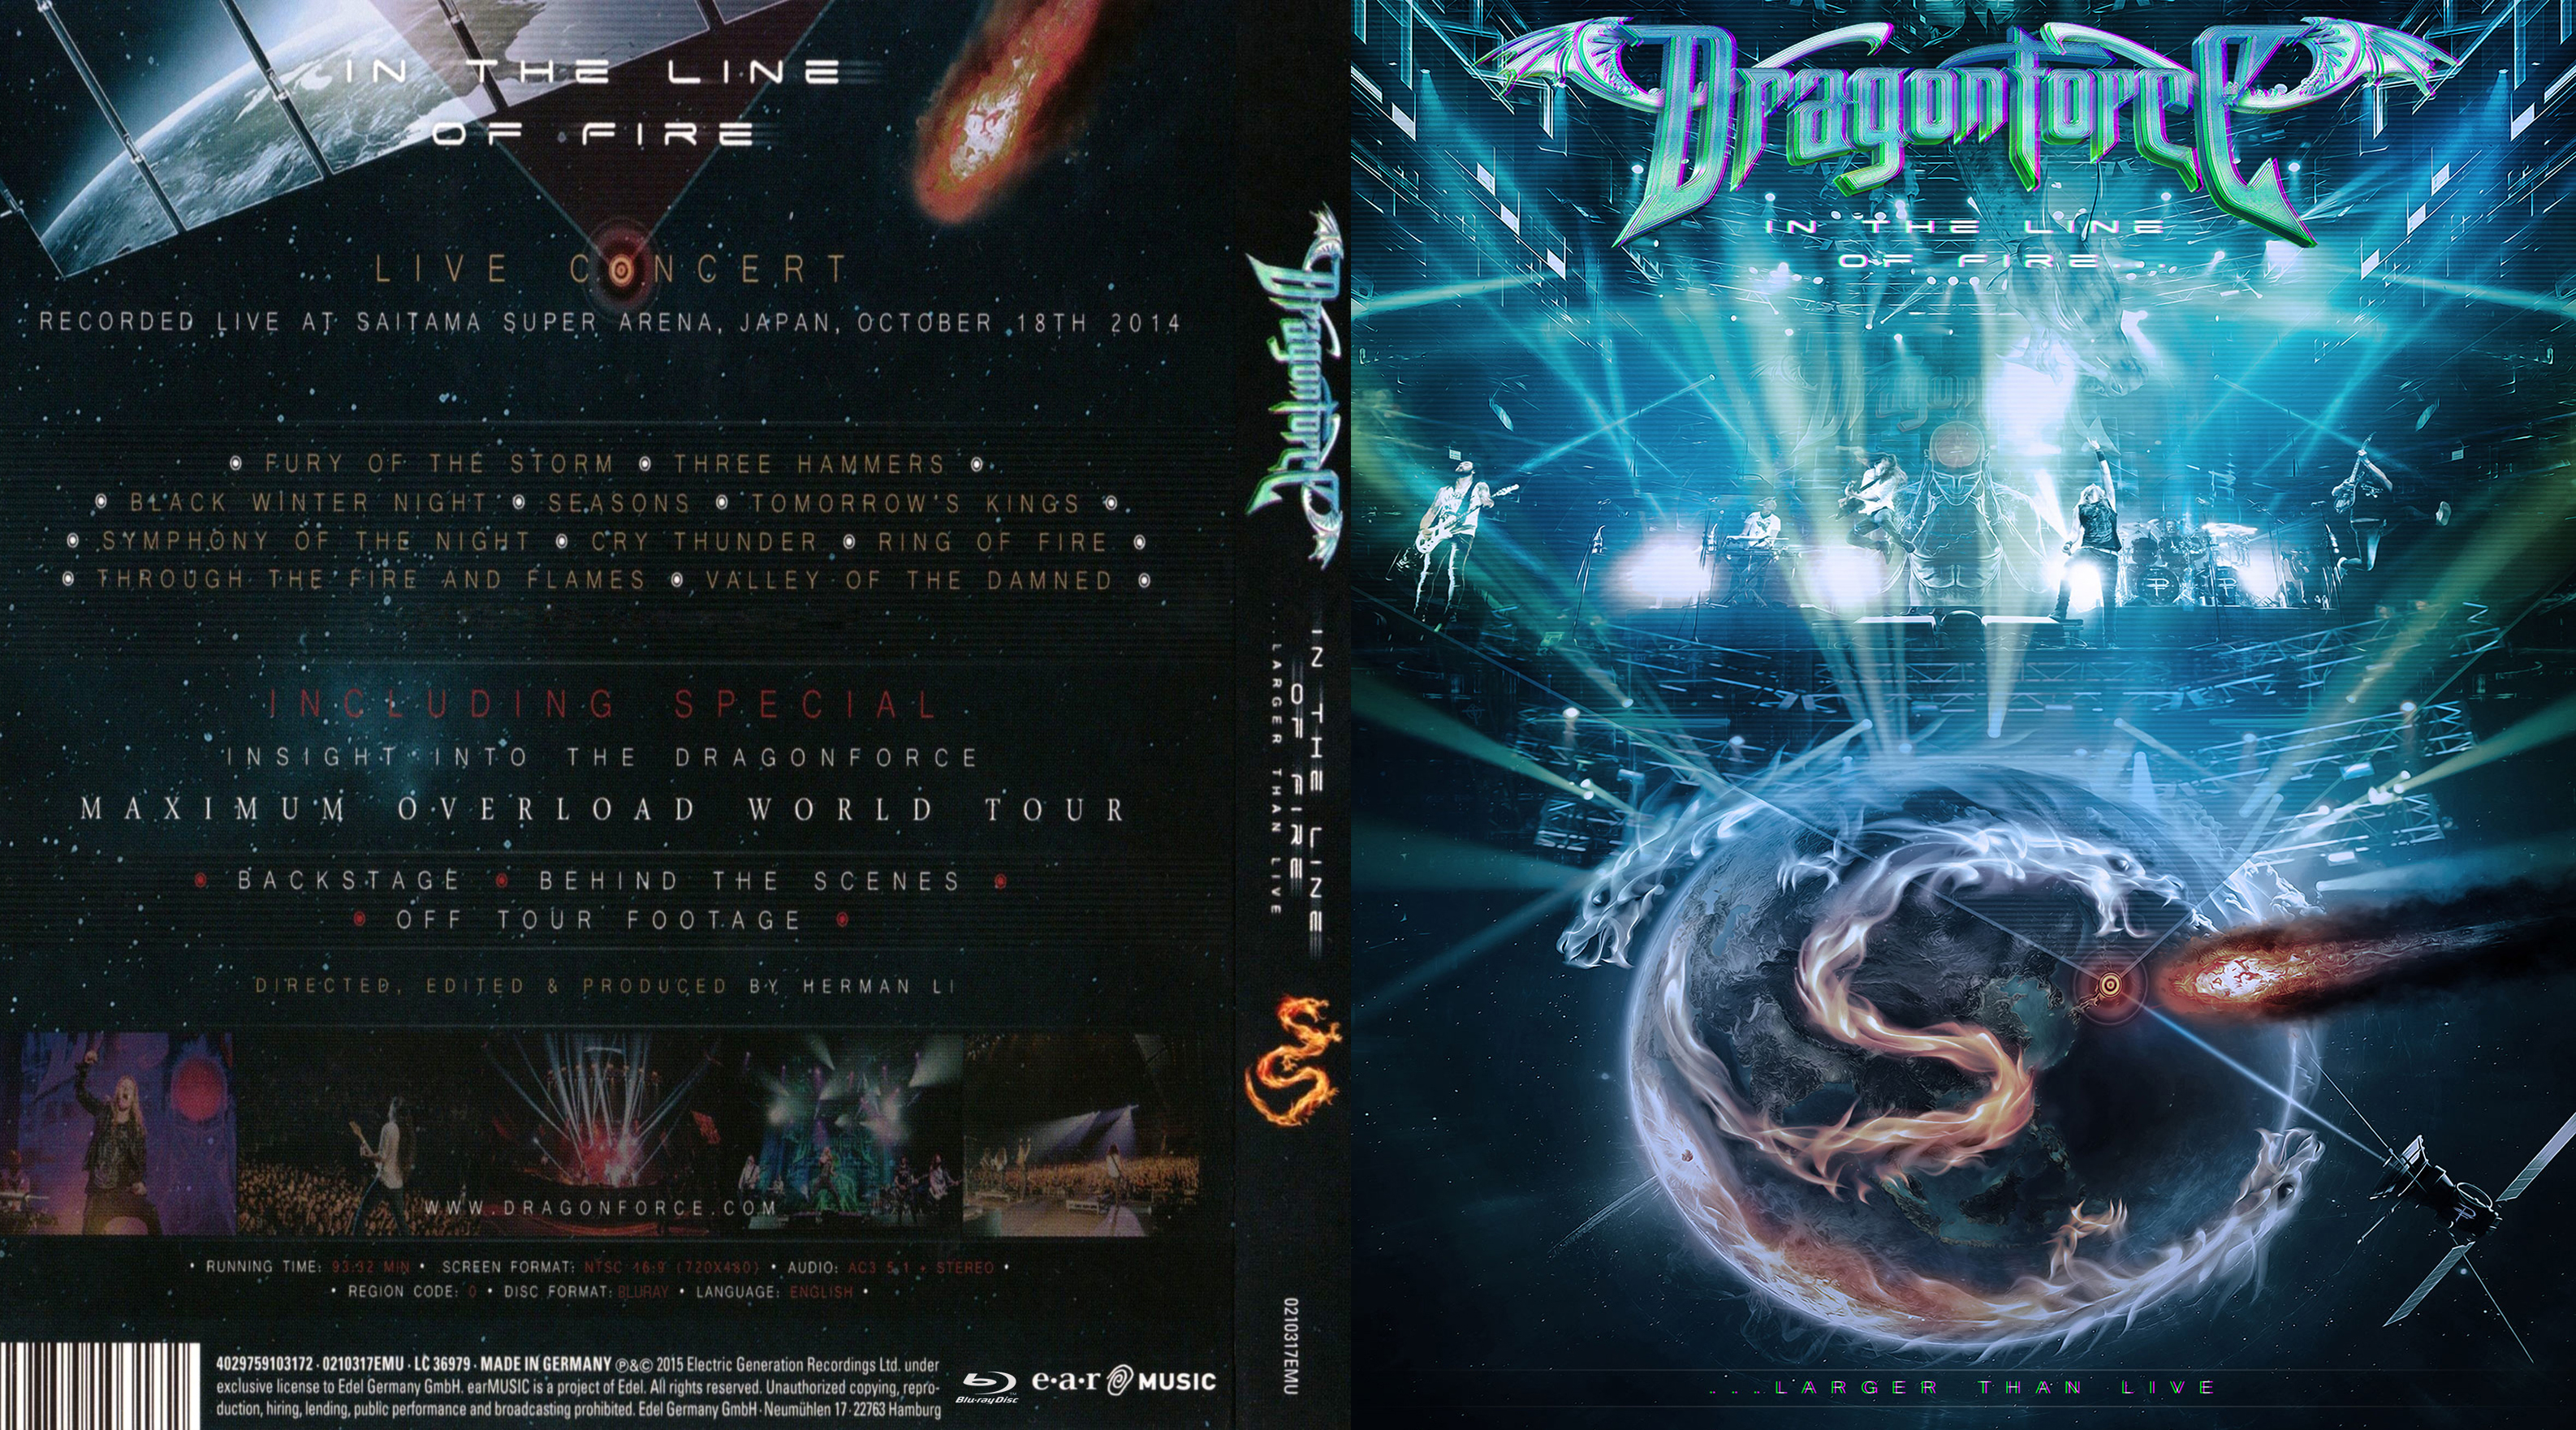  Dragonforce - In The Line Of Fire Blu Ray